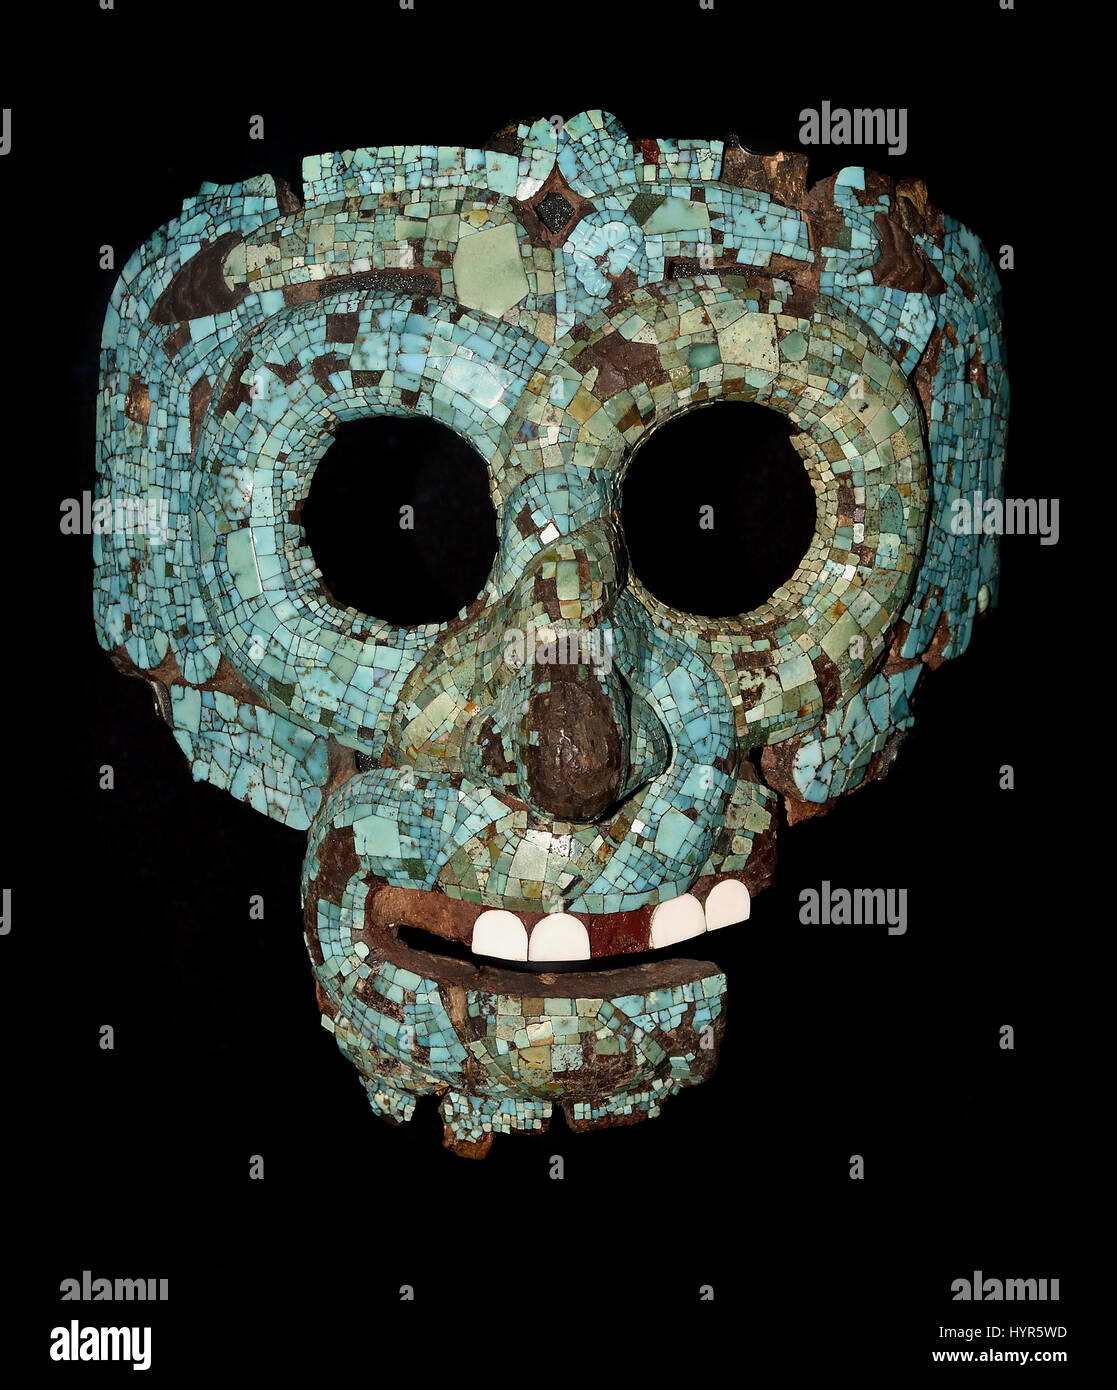 • Serpent mask of Tlaloc, in the form of two intertwined and looped serpents worked in contrasting colours of turquoise mosaic Mixtec Aztec 1400-1521 Mexico (The mask is associated - feather serpent Quetzalcoatl ) The Mayans - Maya civilization was a Mesoamerican civilization in Yucatán  Mexico and Belize in Central America ( 2600 BC - 1500 AD ) Pre Columbian American Stock Photo